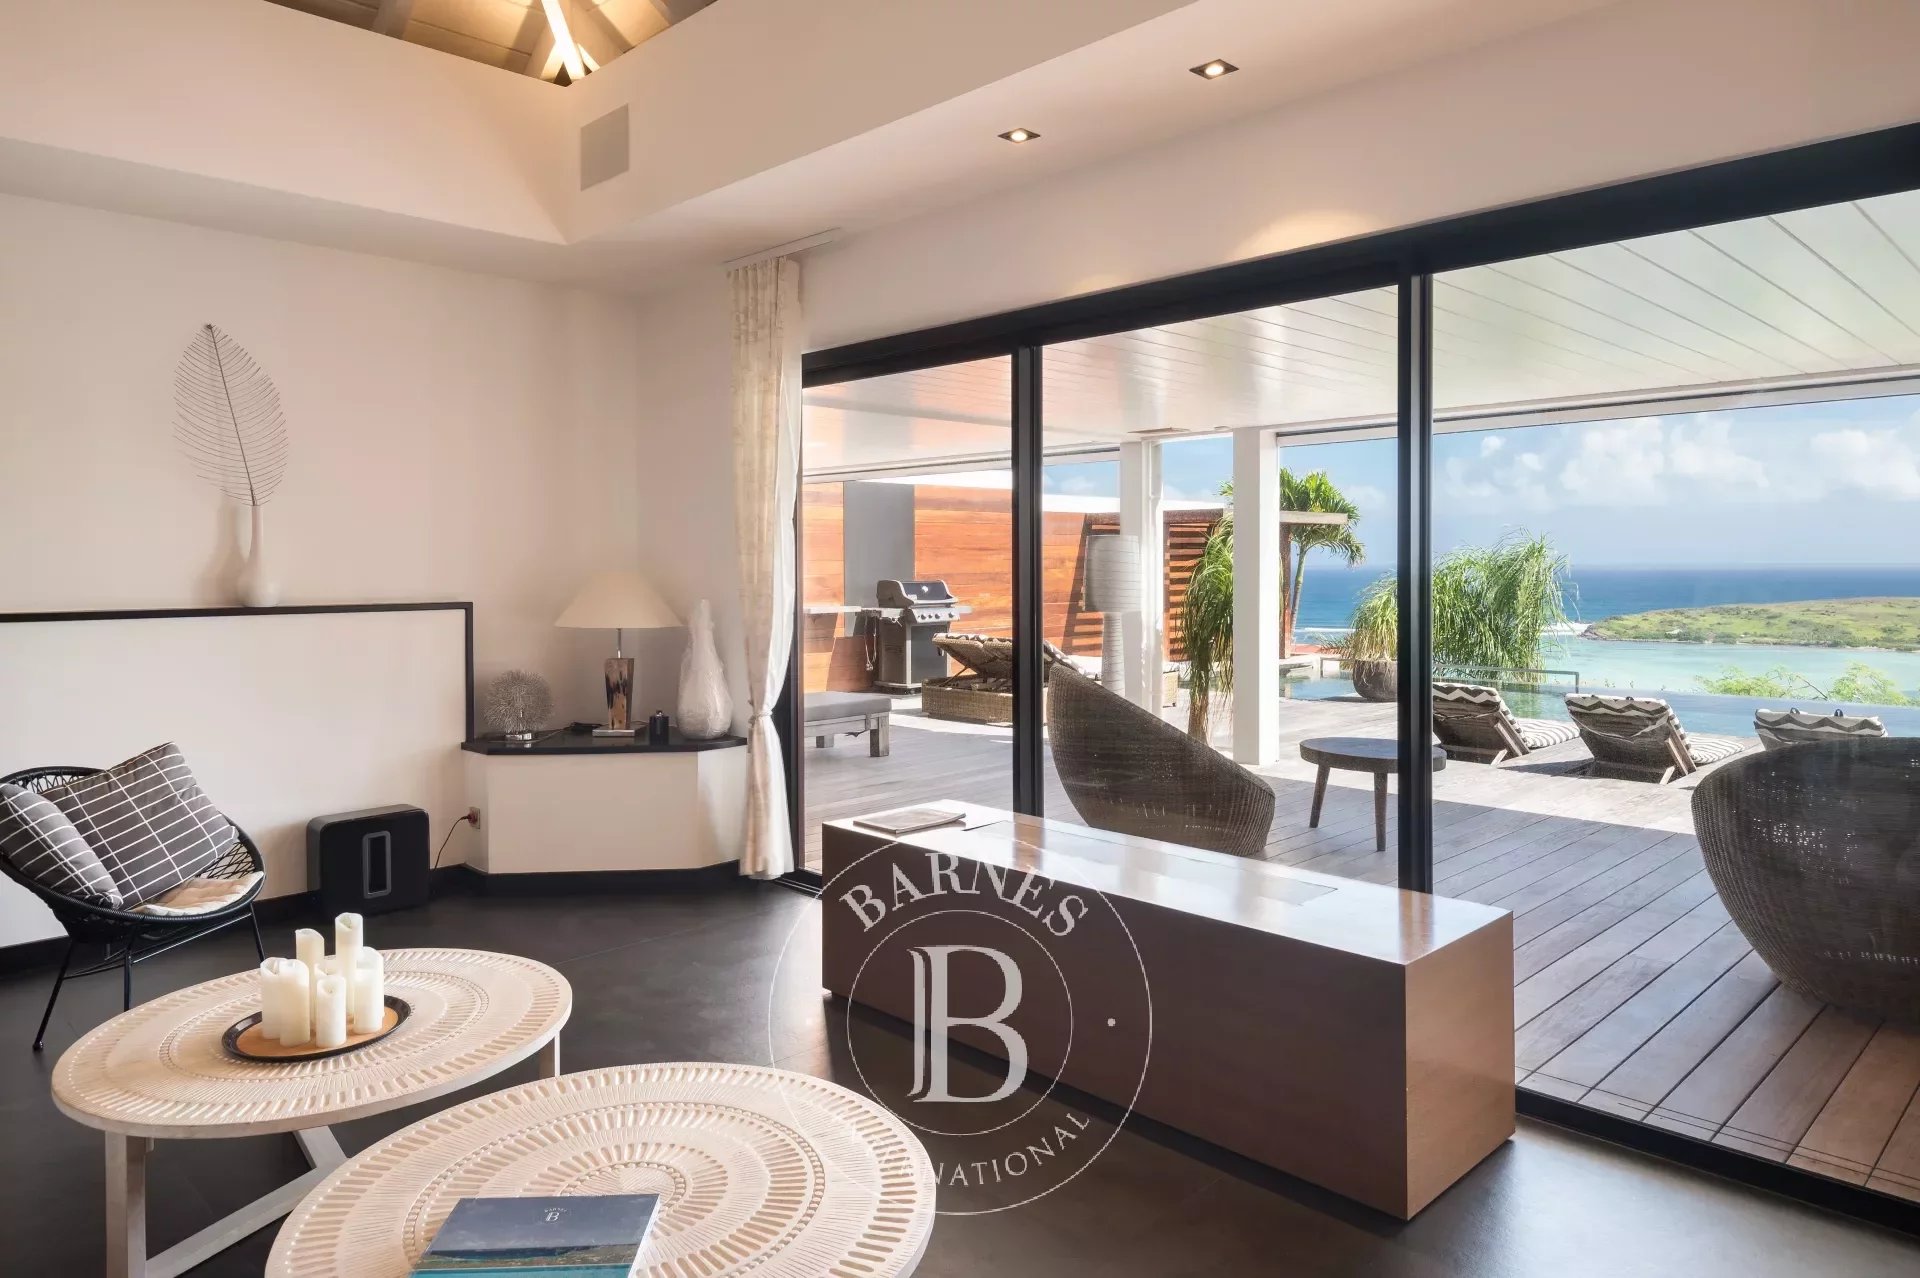 4 -Bedroom Villa in St.Barths - picture 14 title=